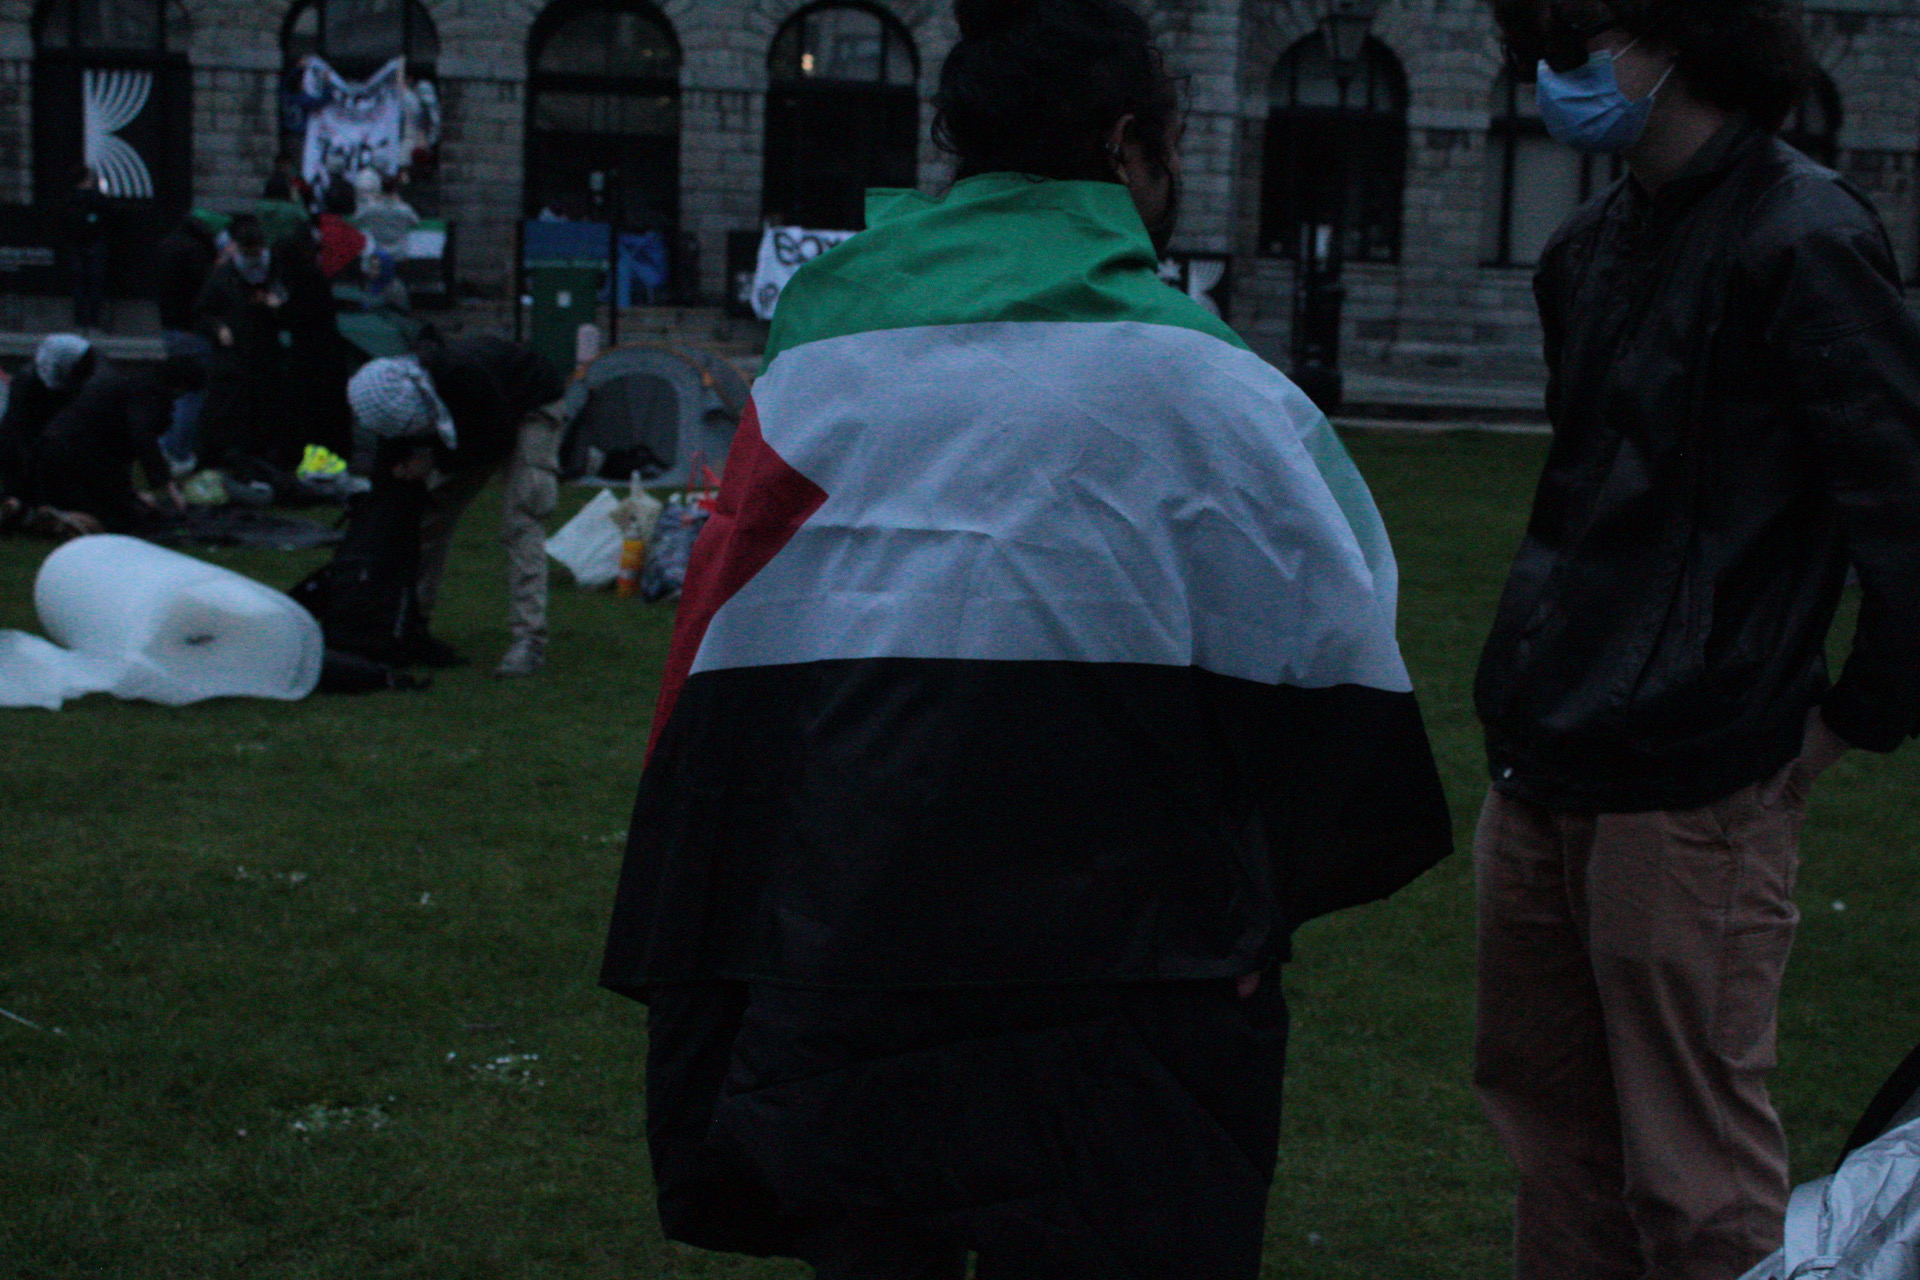 "Protests must be conducted within the rules of the university” - Trinity release statement on BDS encampment – Trinity News